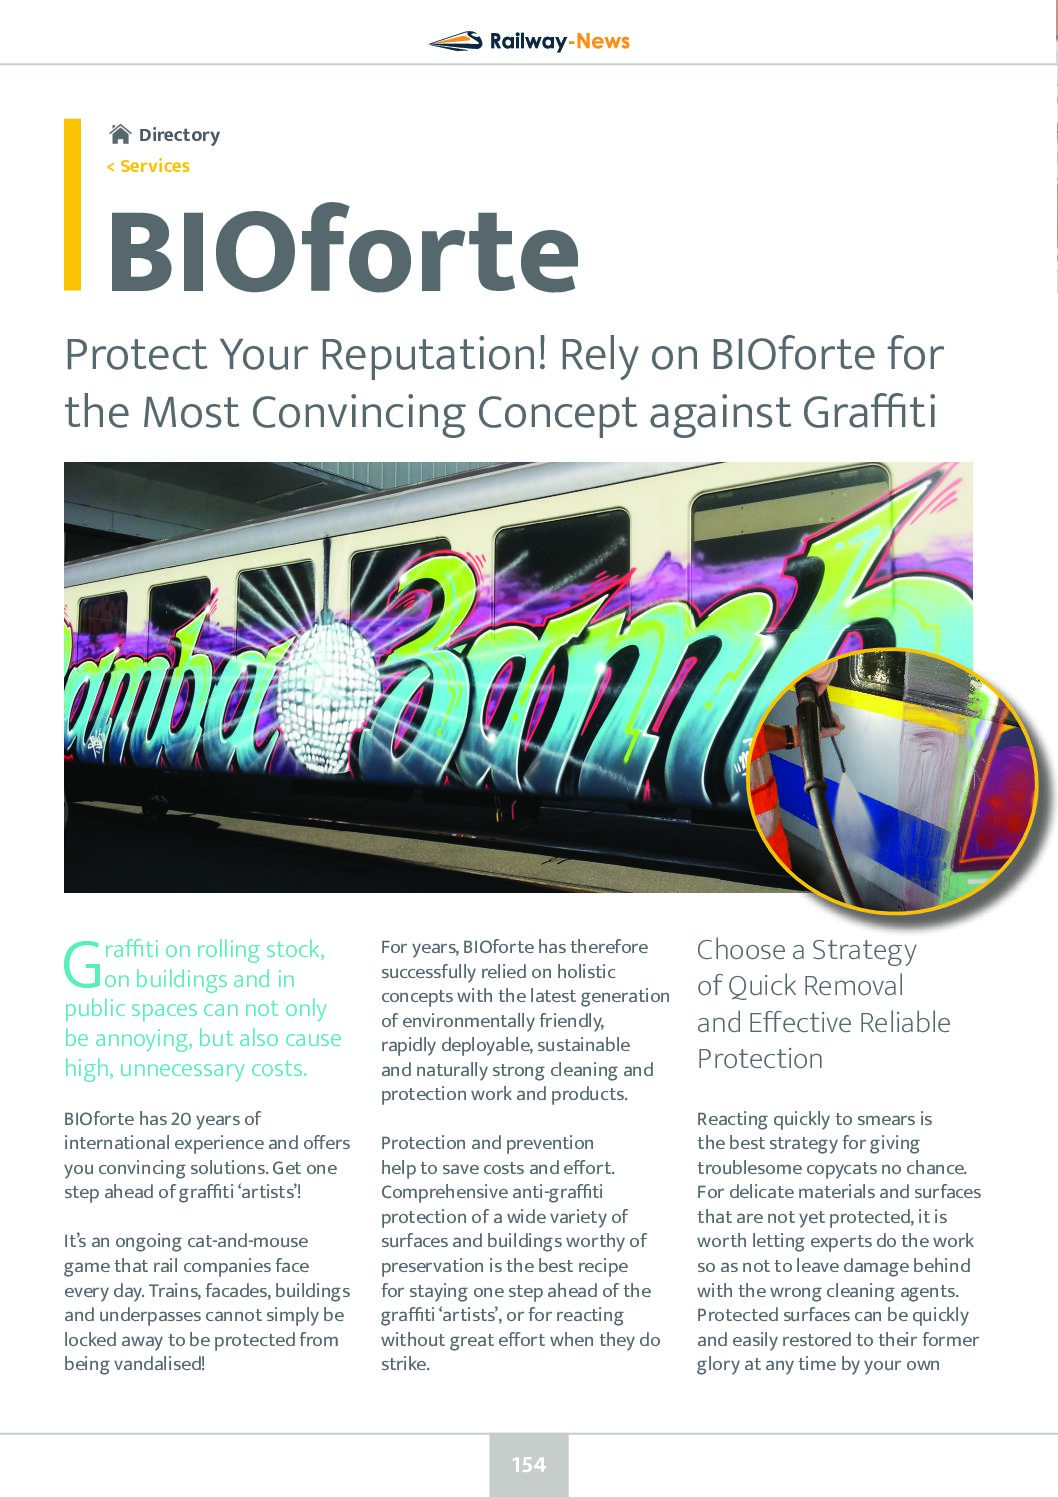 Rely on BIOforte for the Most Convincing Concept against Graffiti